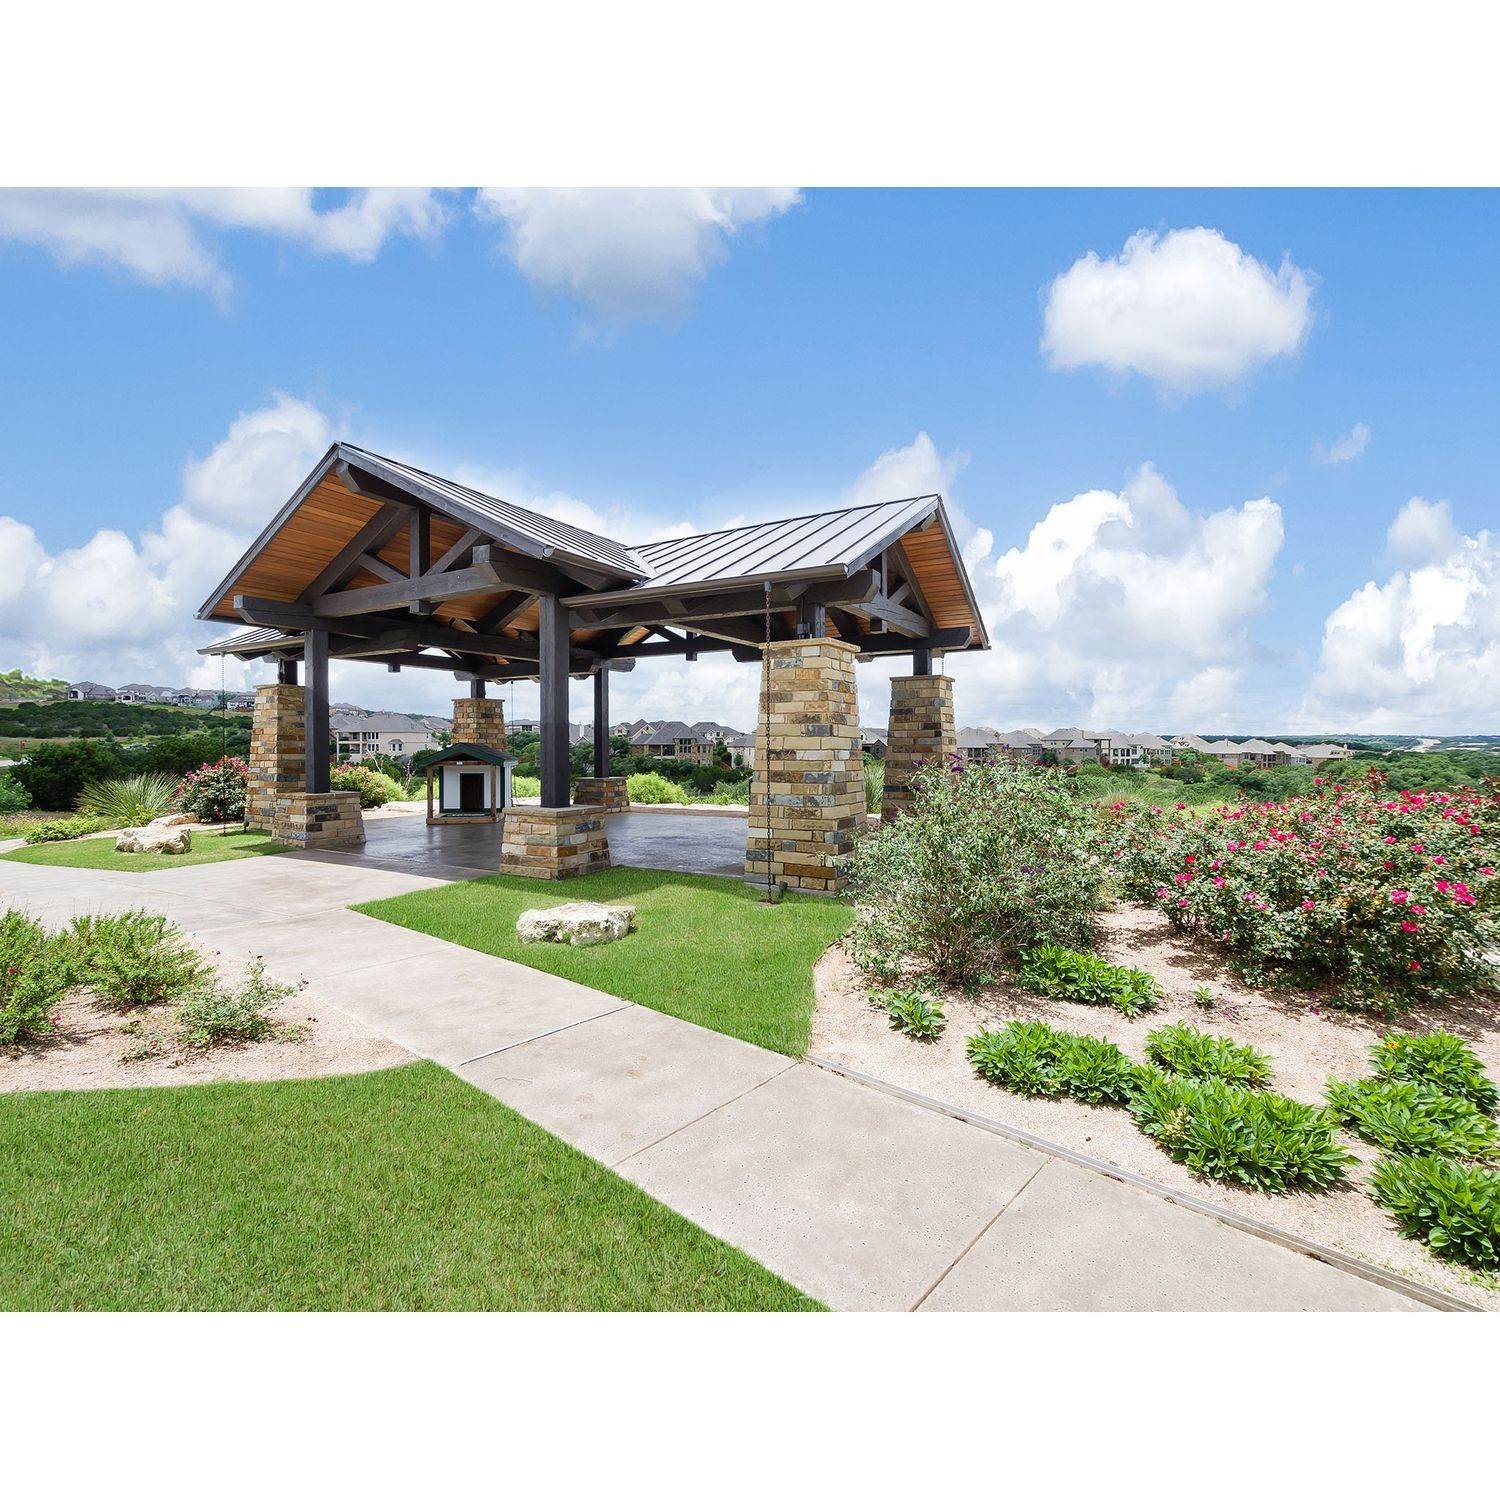 8. Sweetwater 60' bâtiment à 6208 Bower Well Road, Austin, TX 78738